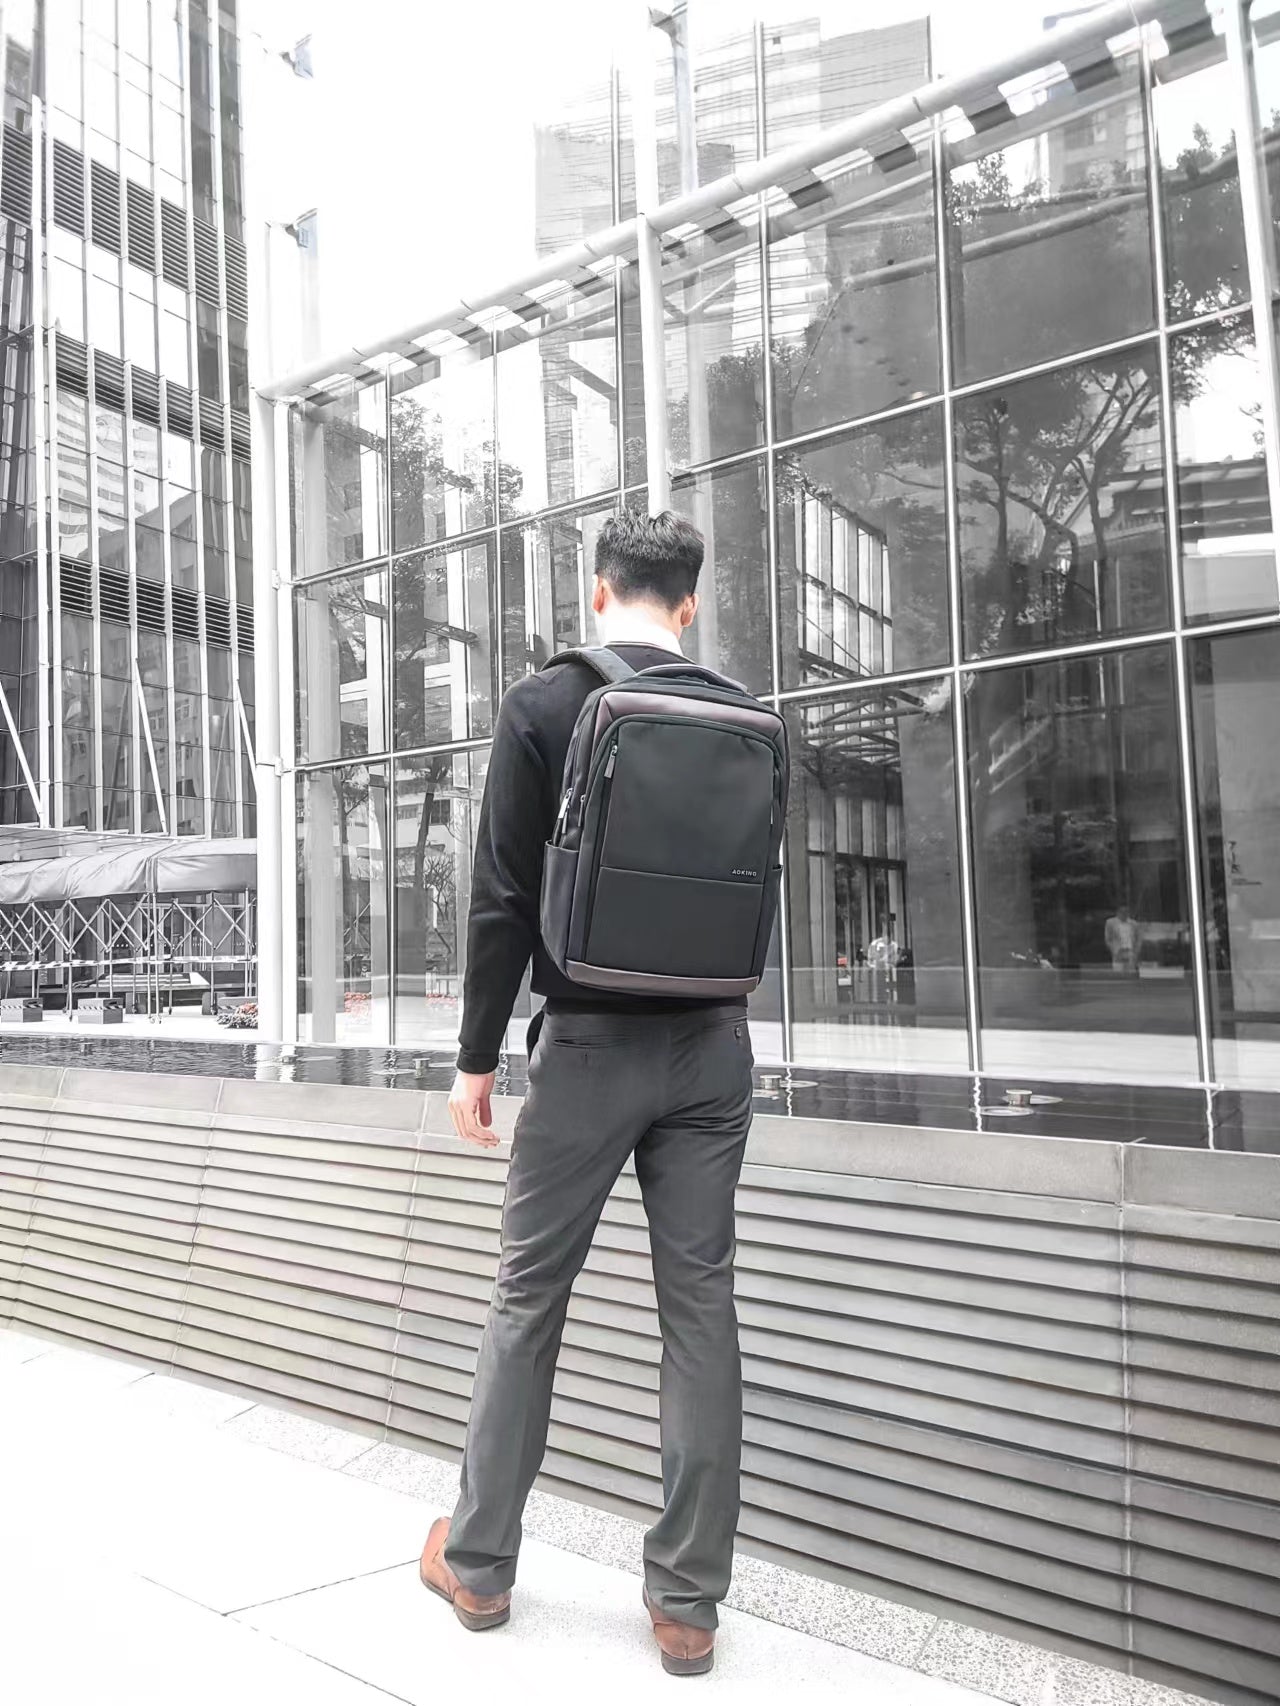 Aoking Business Laptop Backpack SN2119 Navy